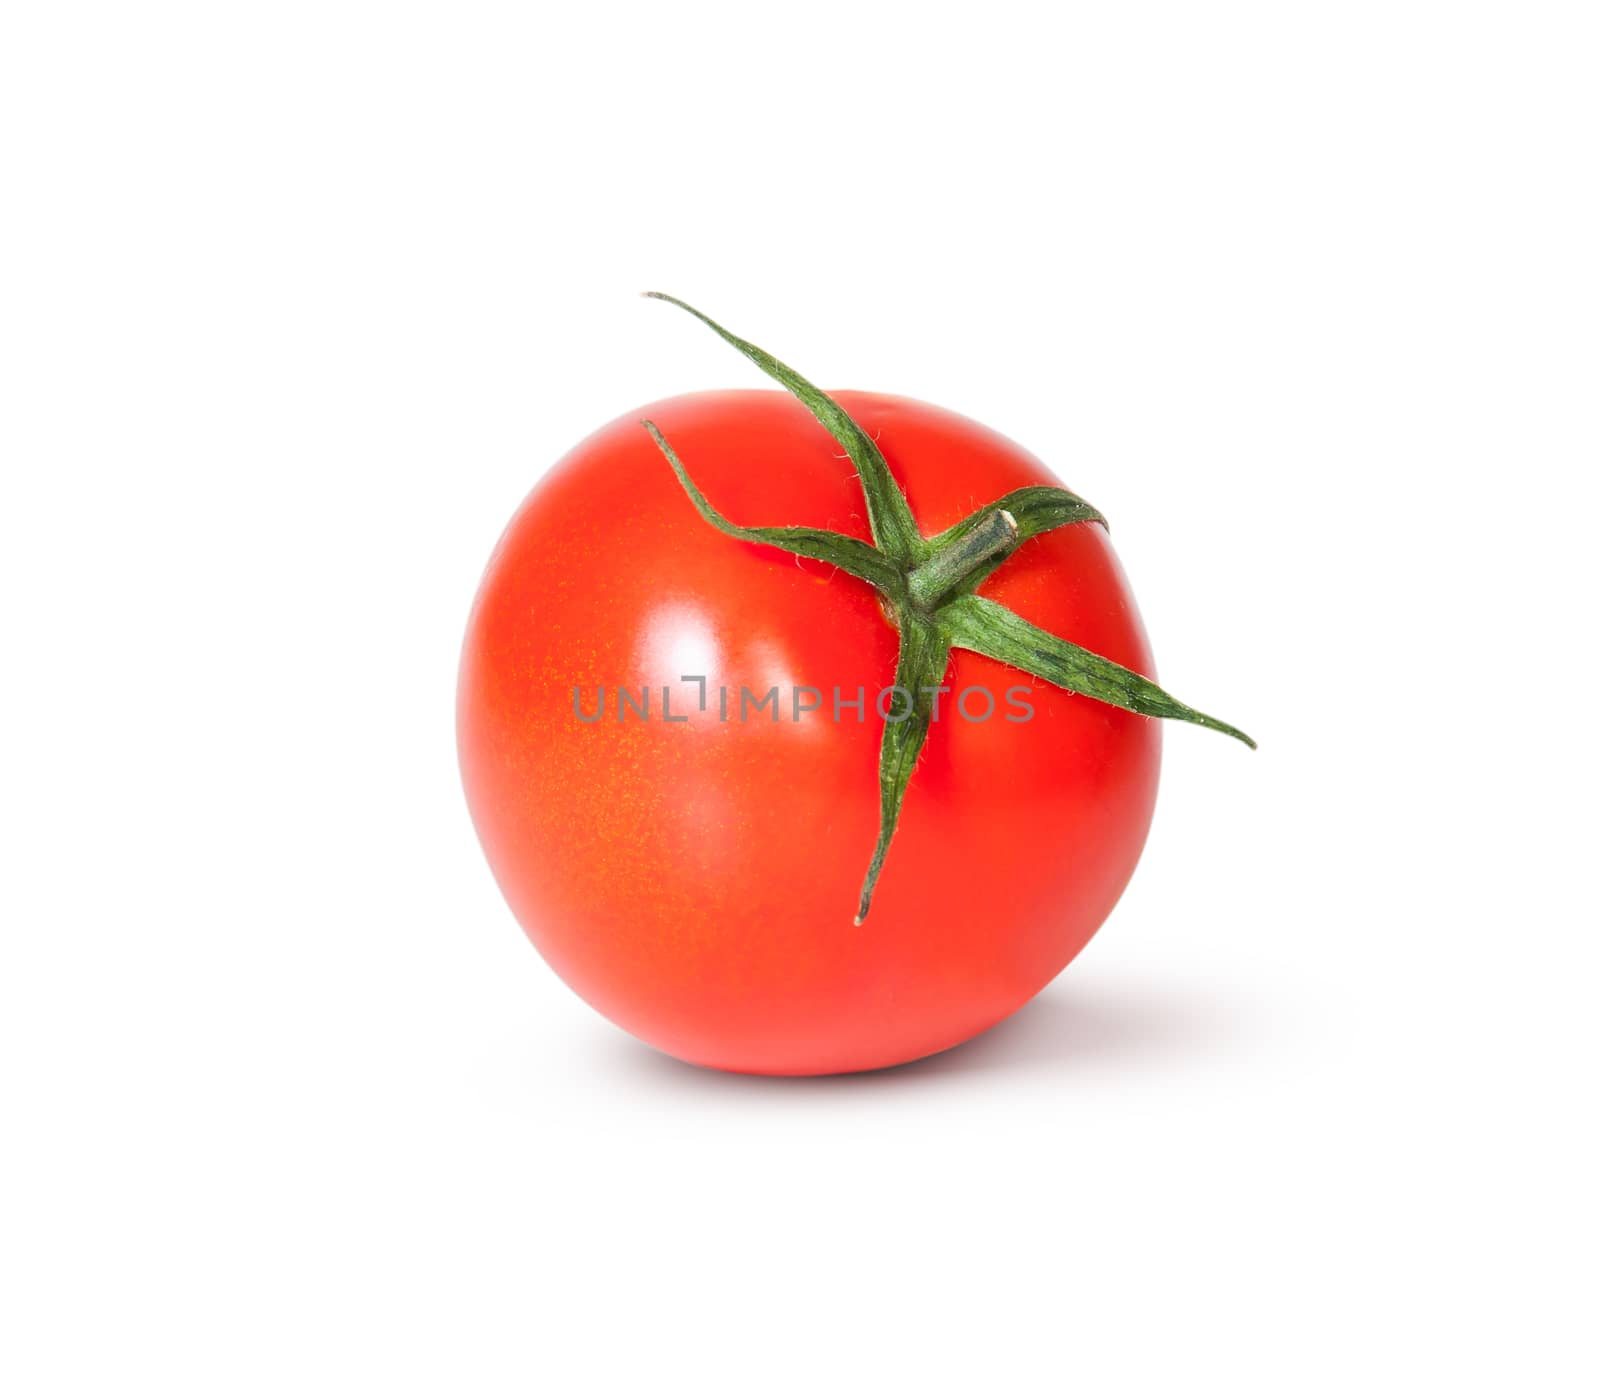 Single Fresh Red Tomato With Green Stem Rotated Isolated On White Background